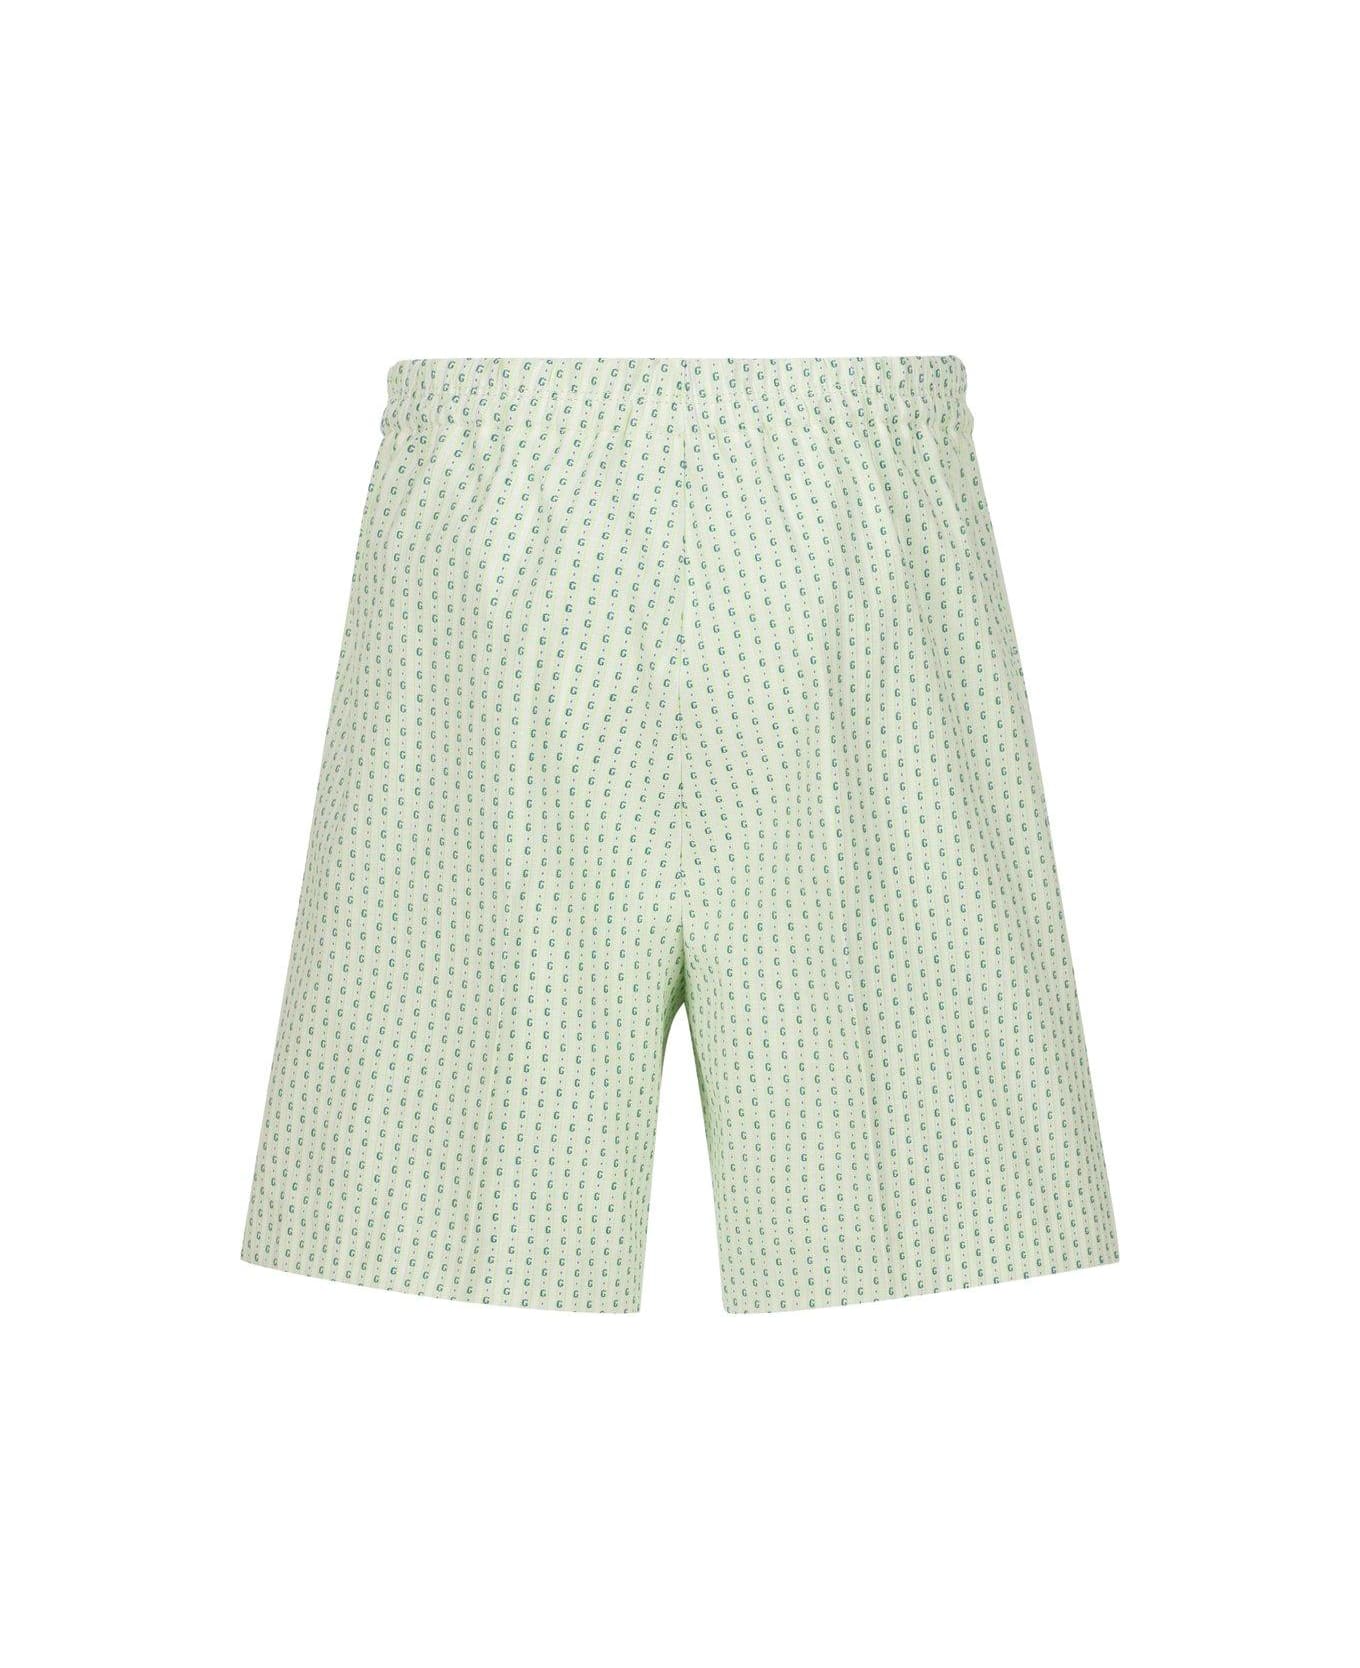 Gucci Button Detailed Striped Shorts ボトムス